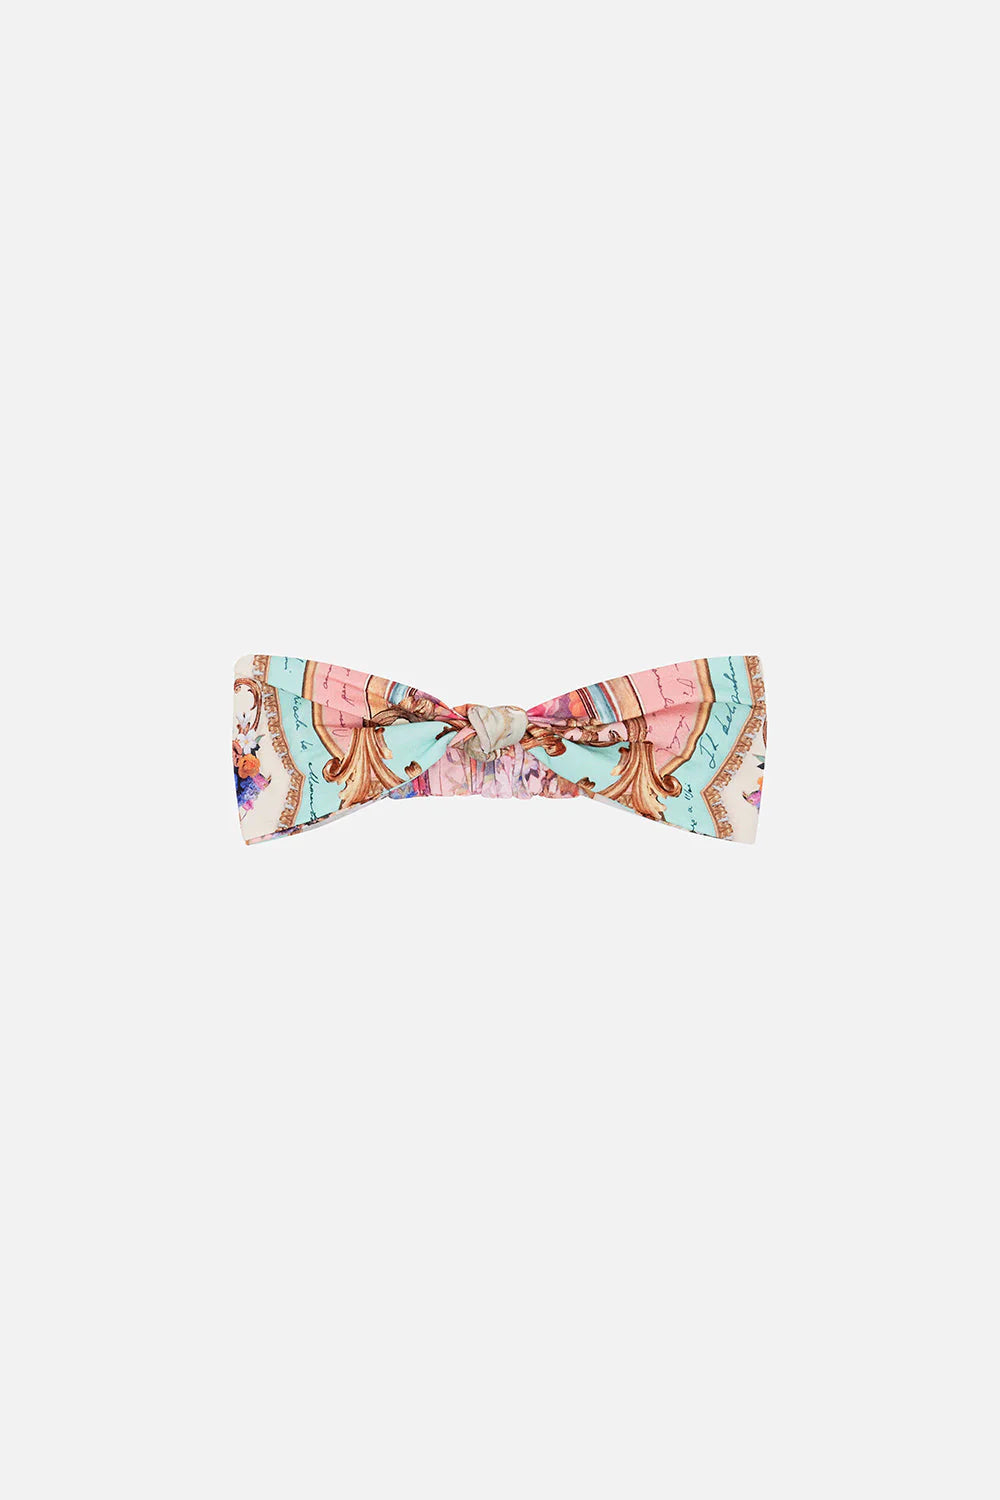 Camilla Letters From The Pink Room Kids Knot Headband